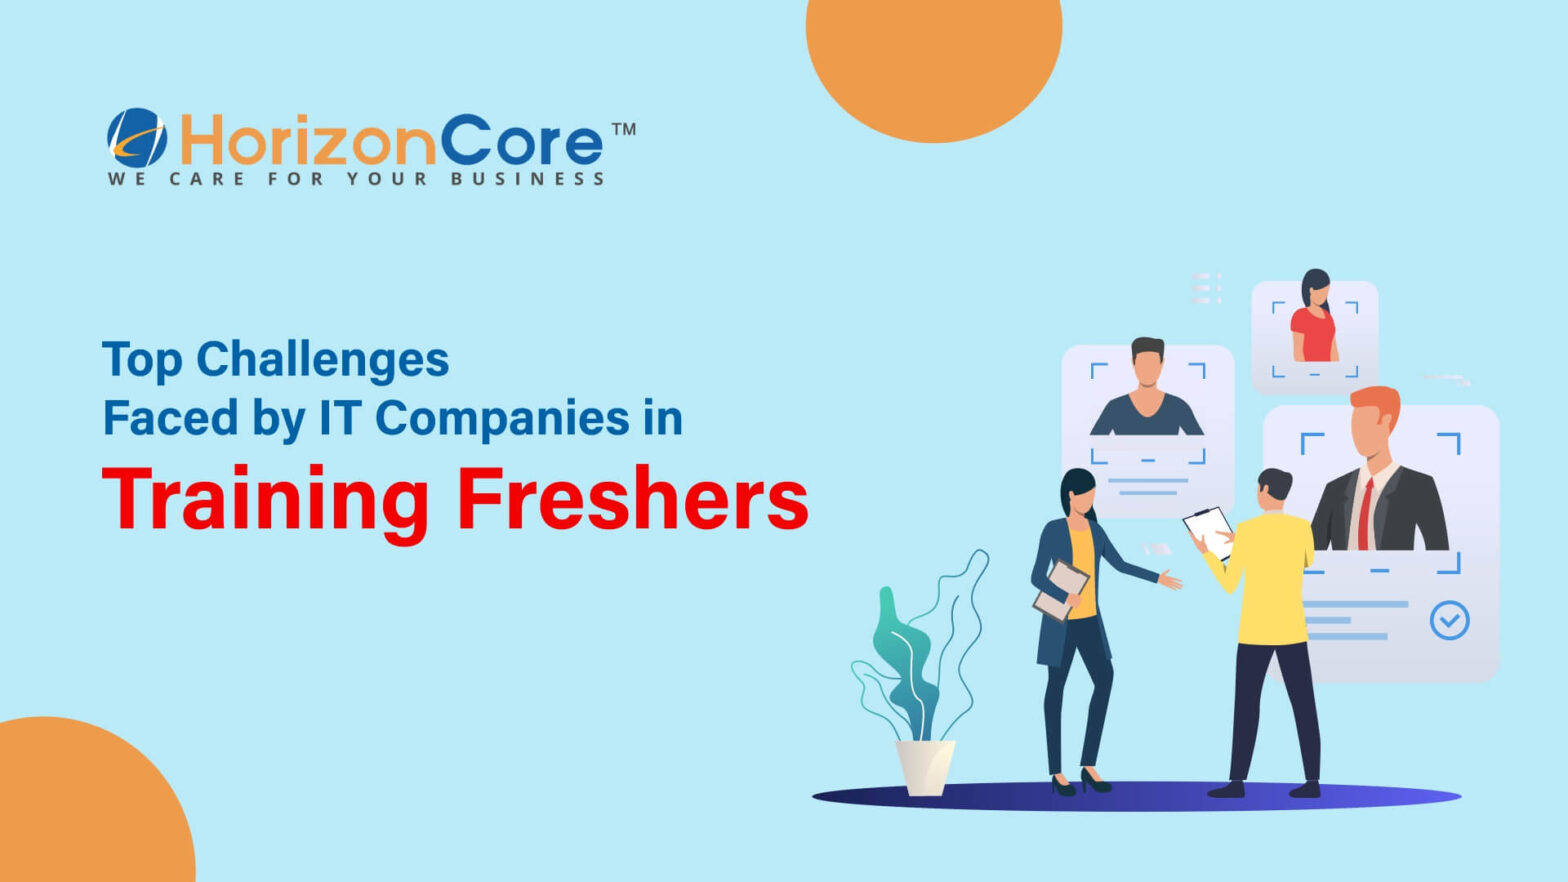 Top Challenges Faced by IT Companies in Training Freshers